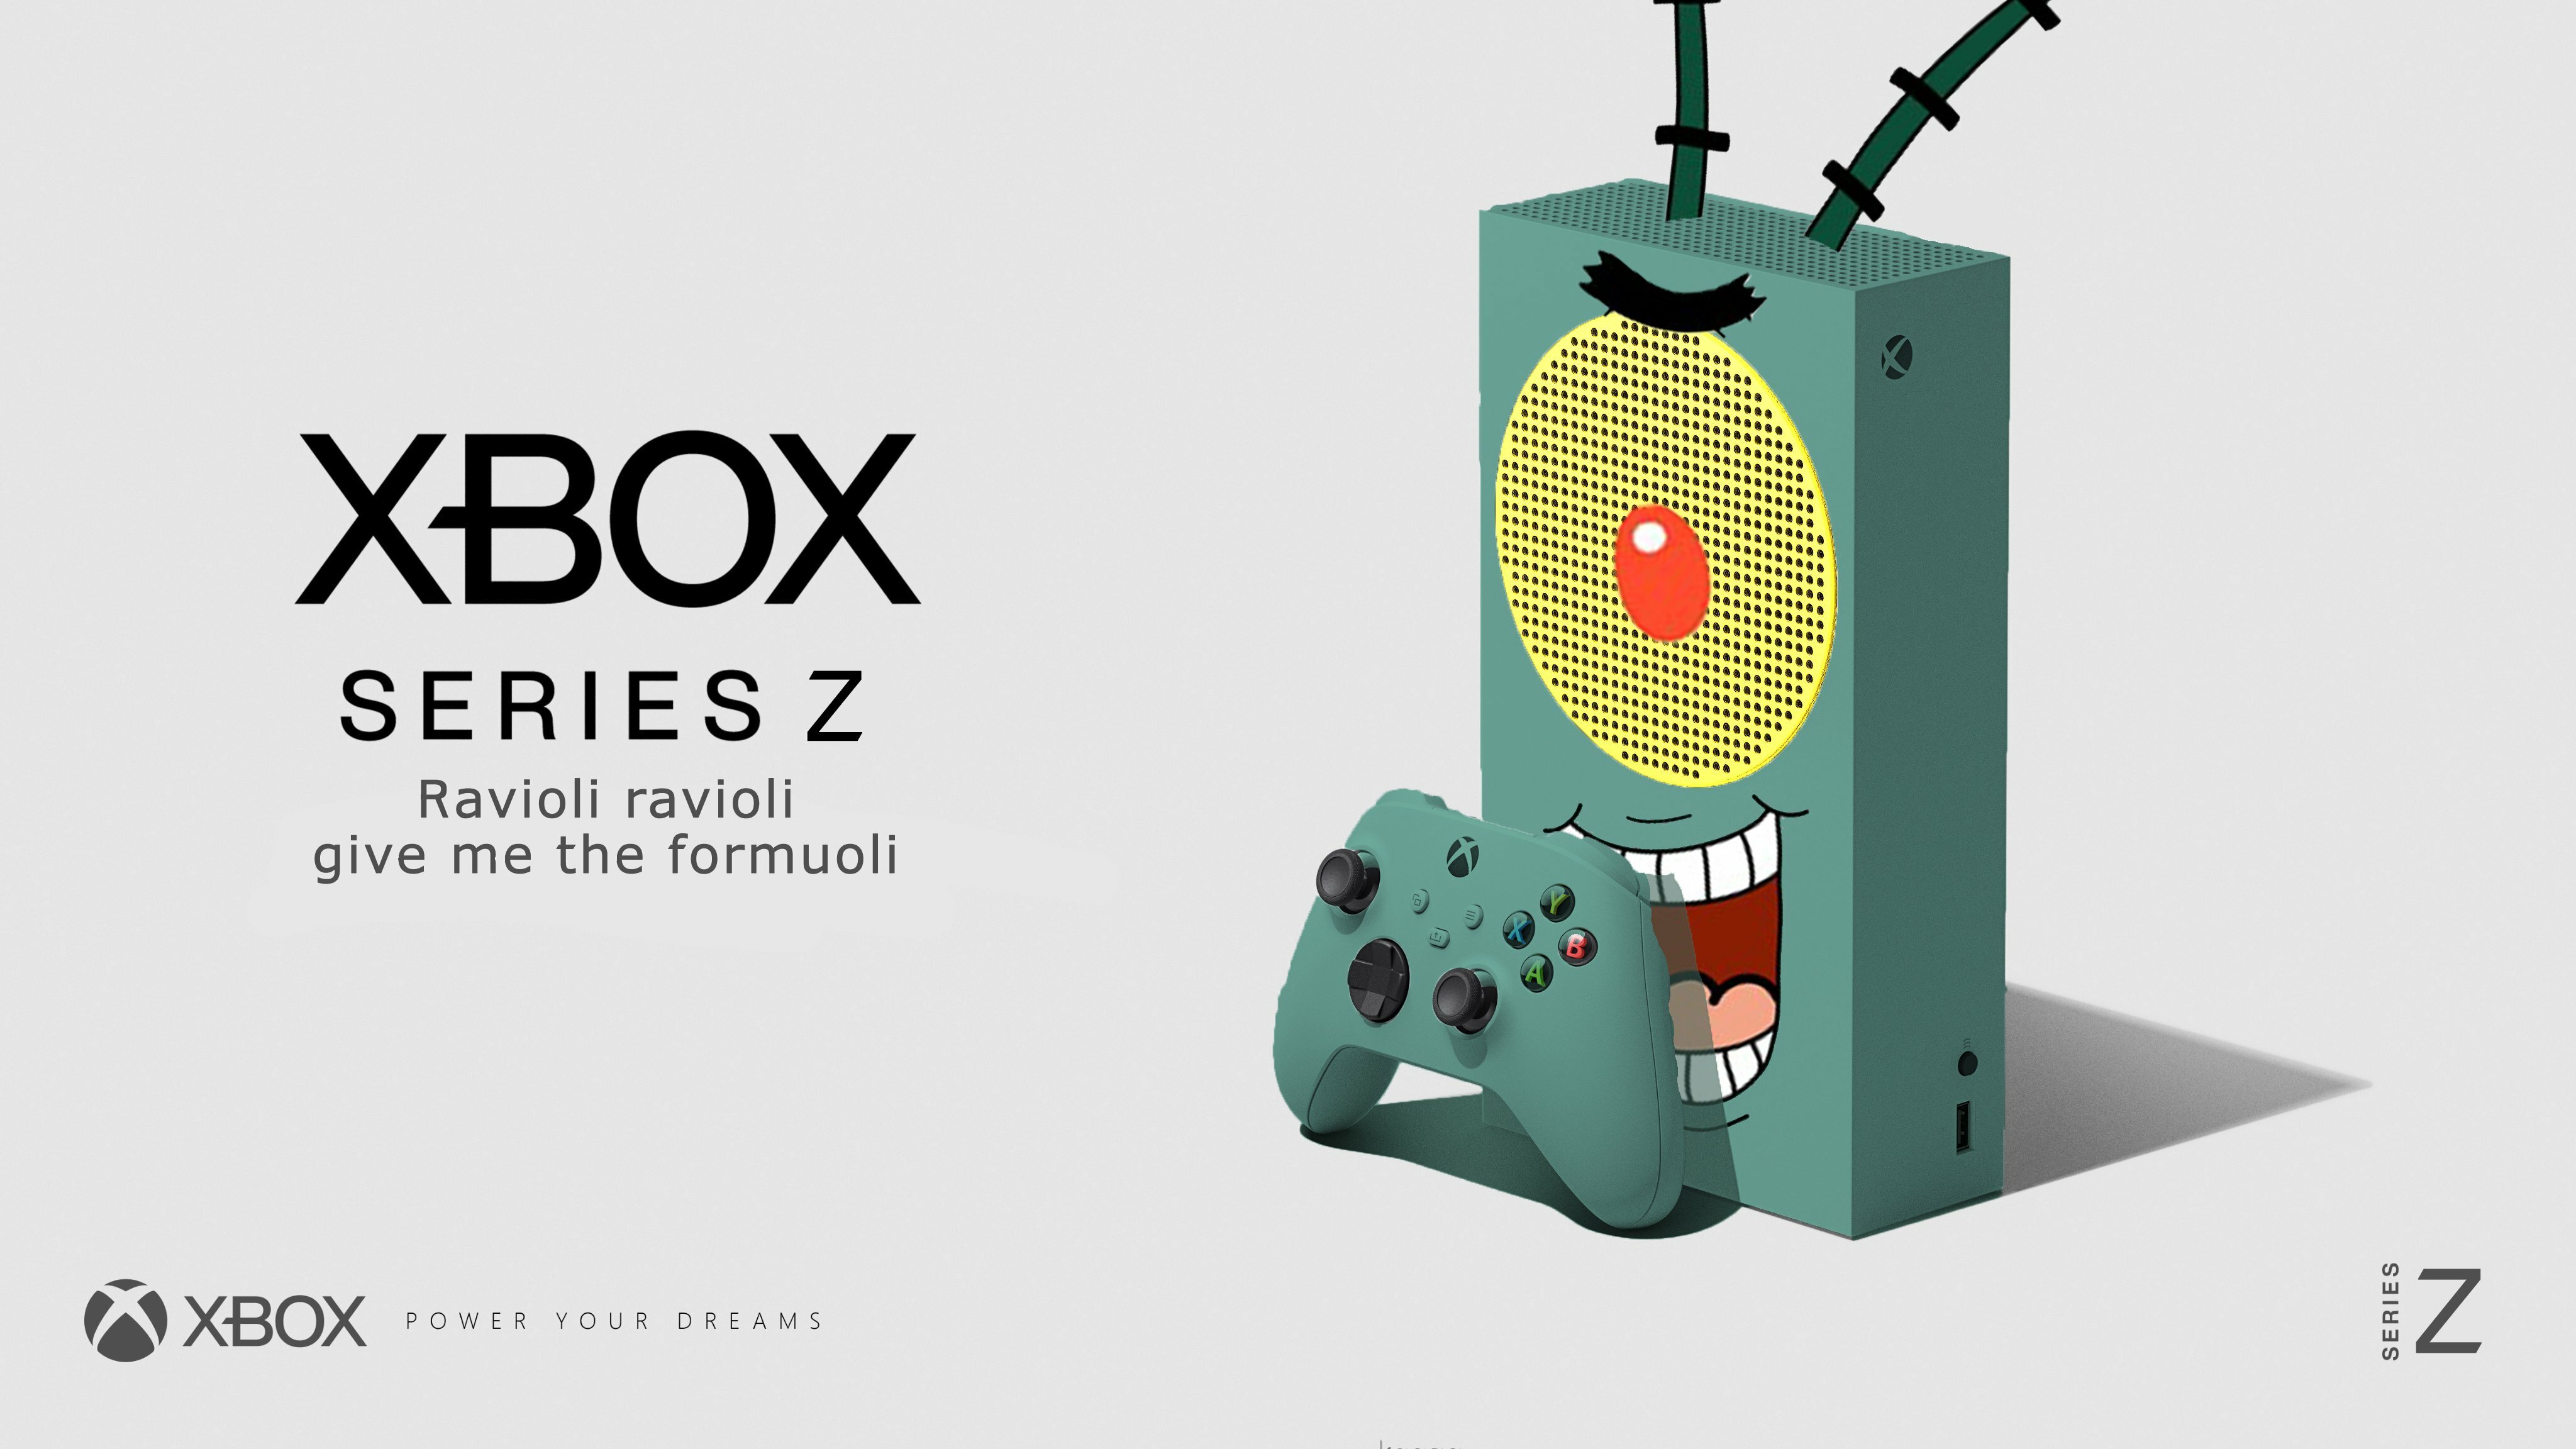 Your Xbox is now obsolete - The Xbox Series Z 